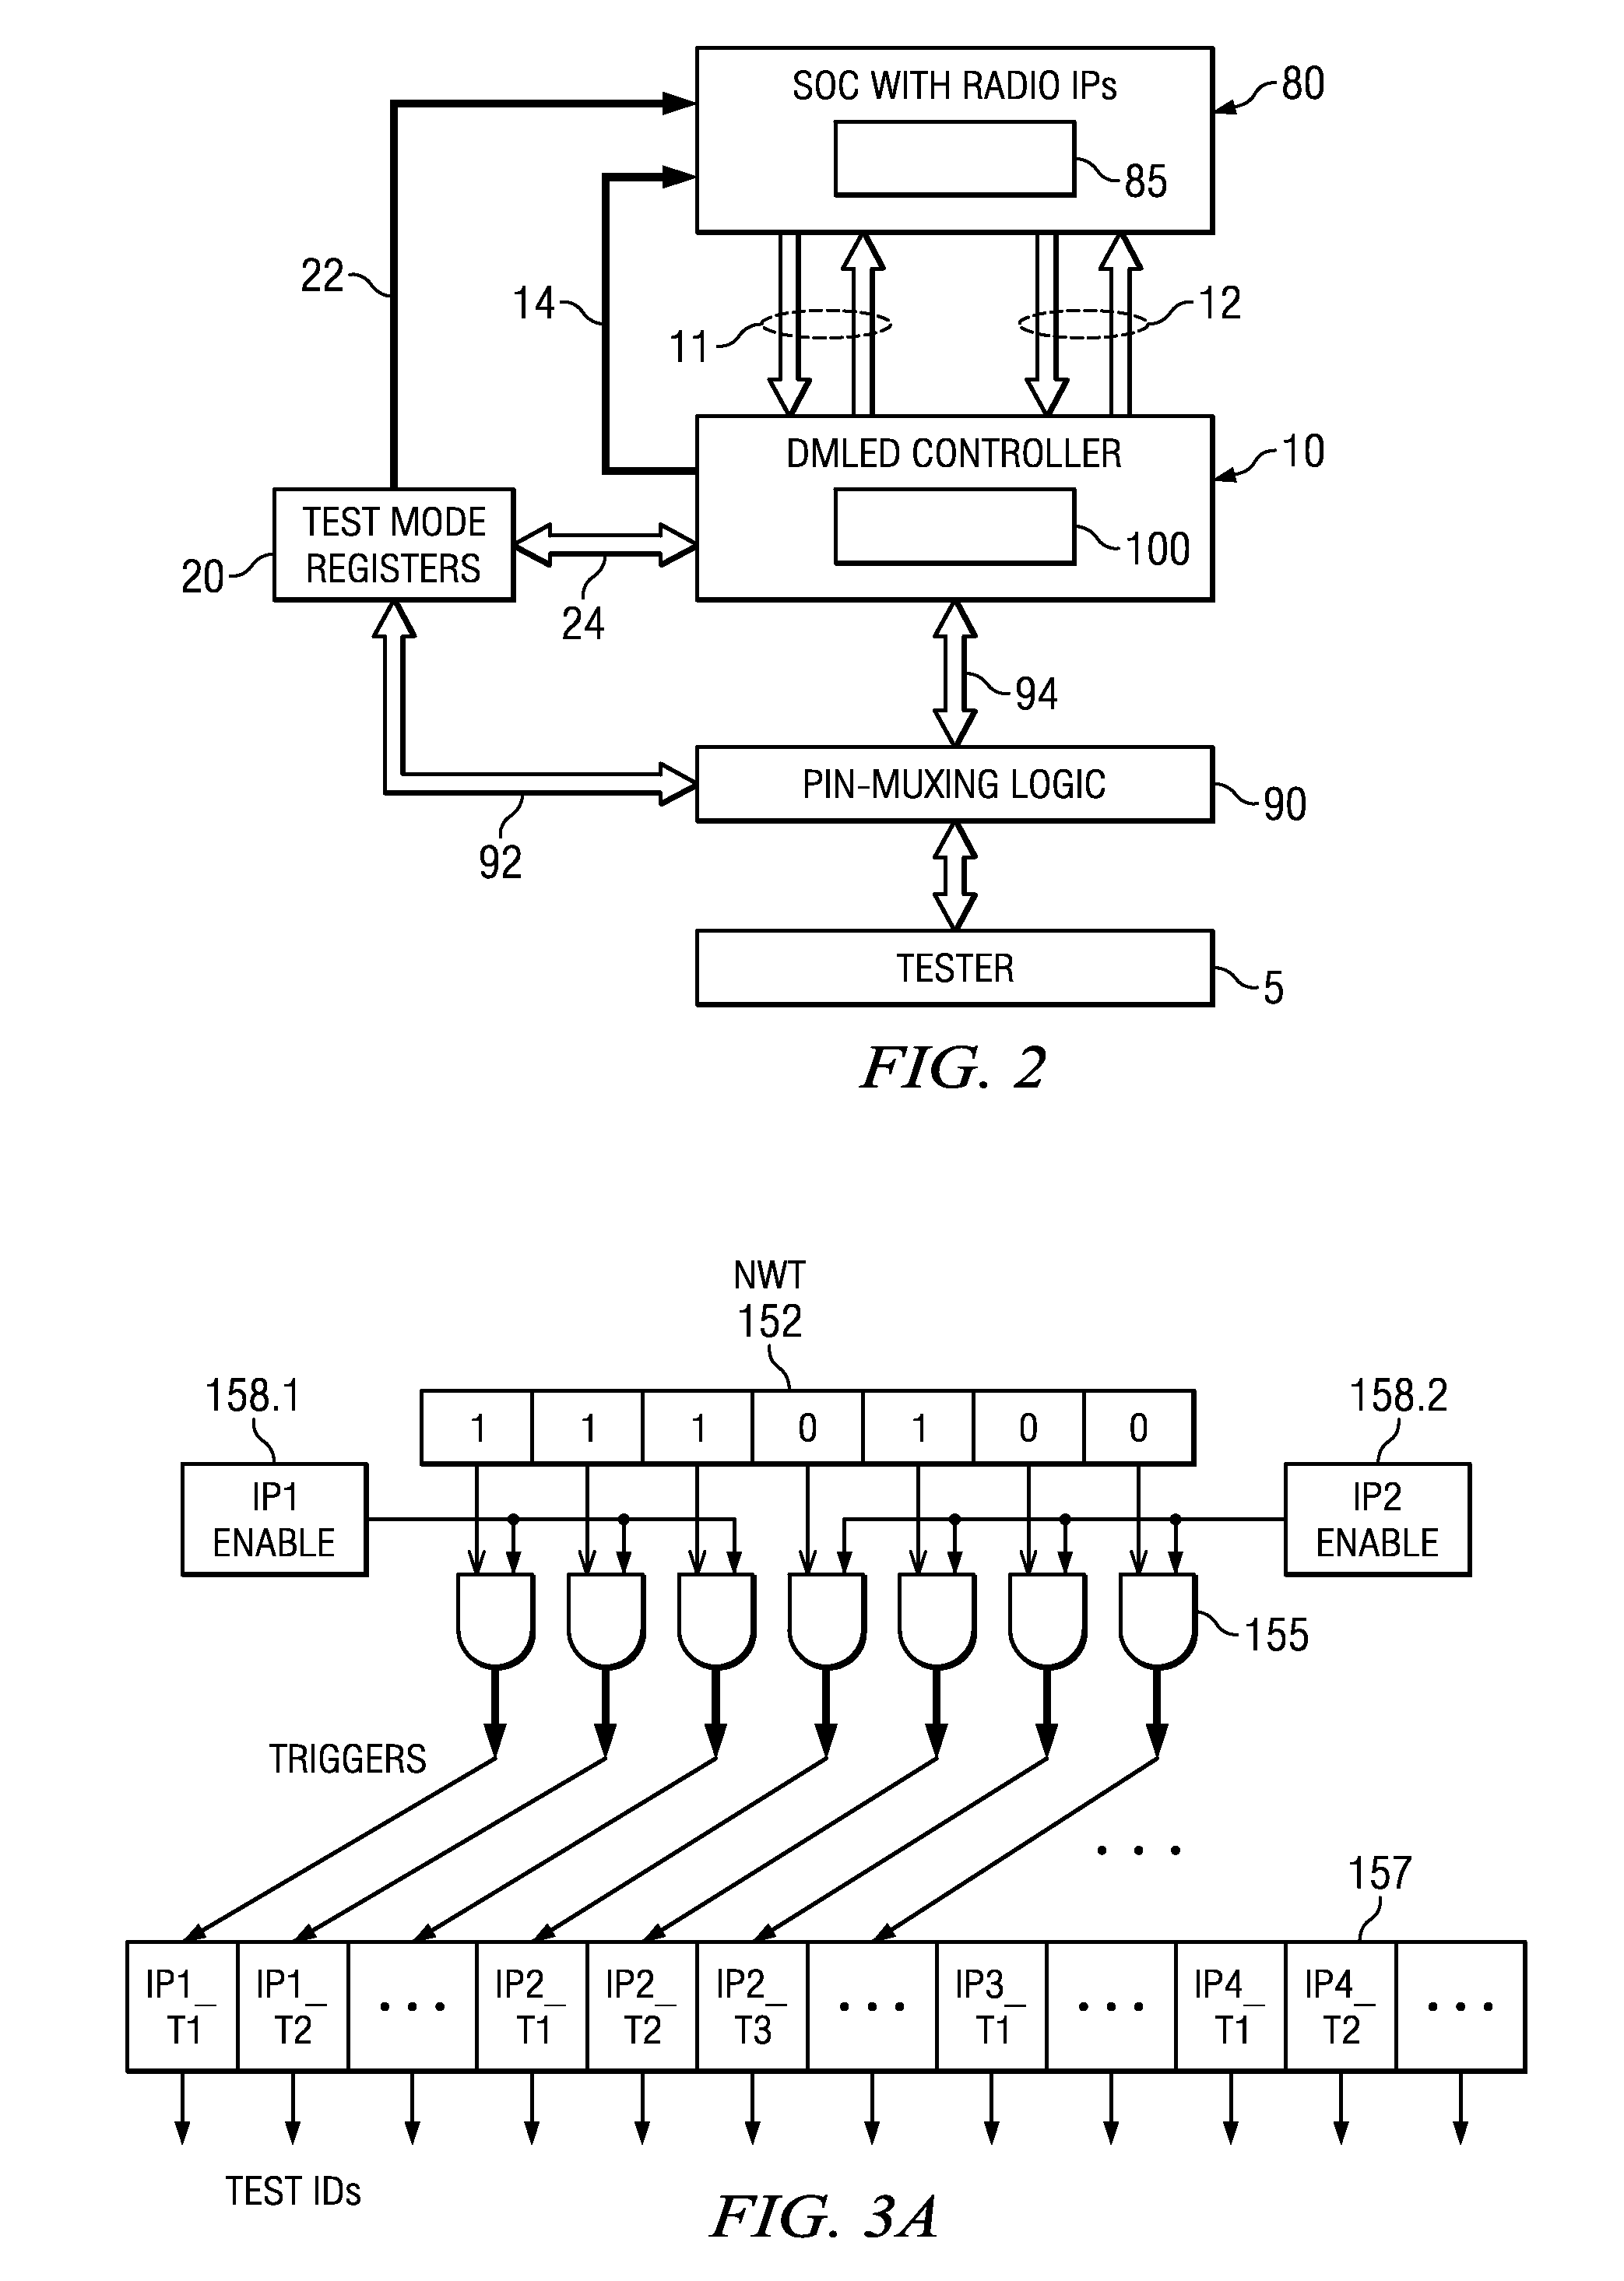 Built-in self-test methods, circuits and apparatus for concurrent test of RF modules with a dynamically configurable test structure